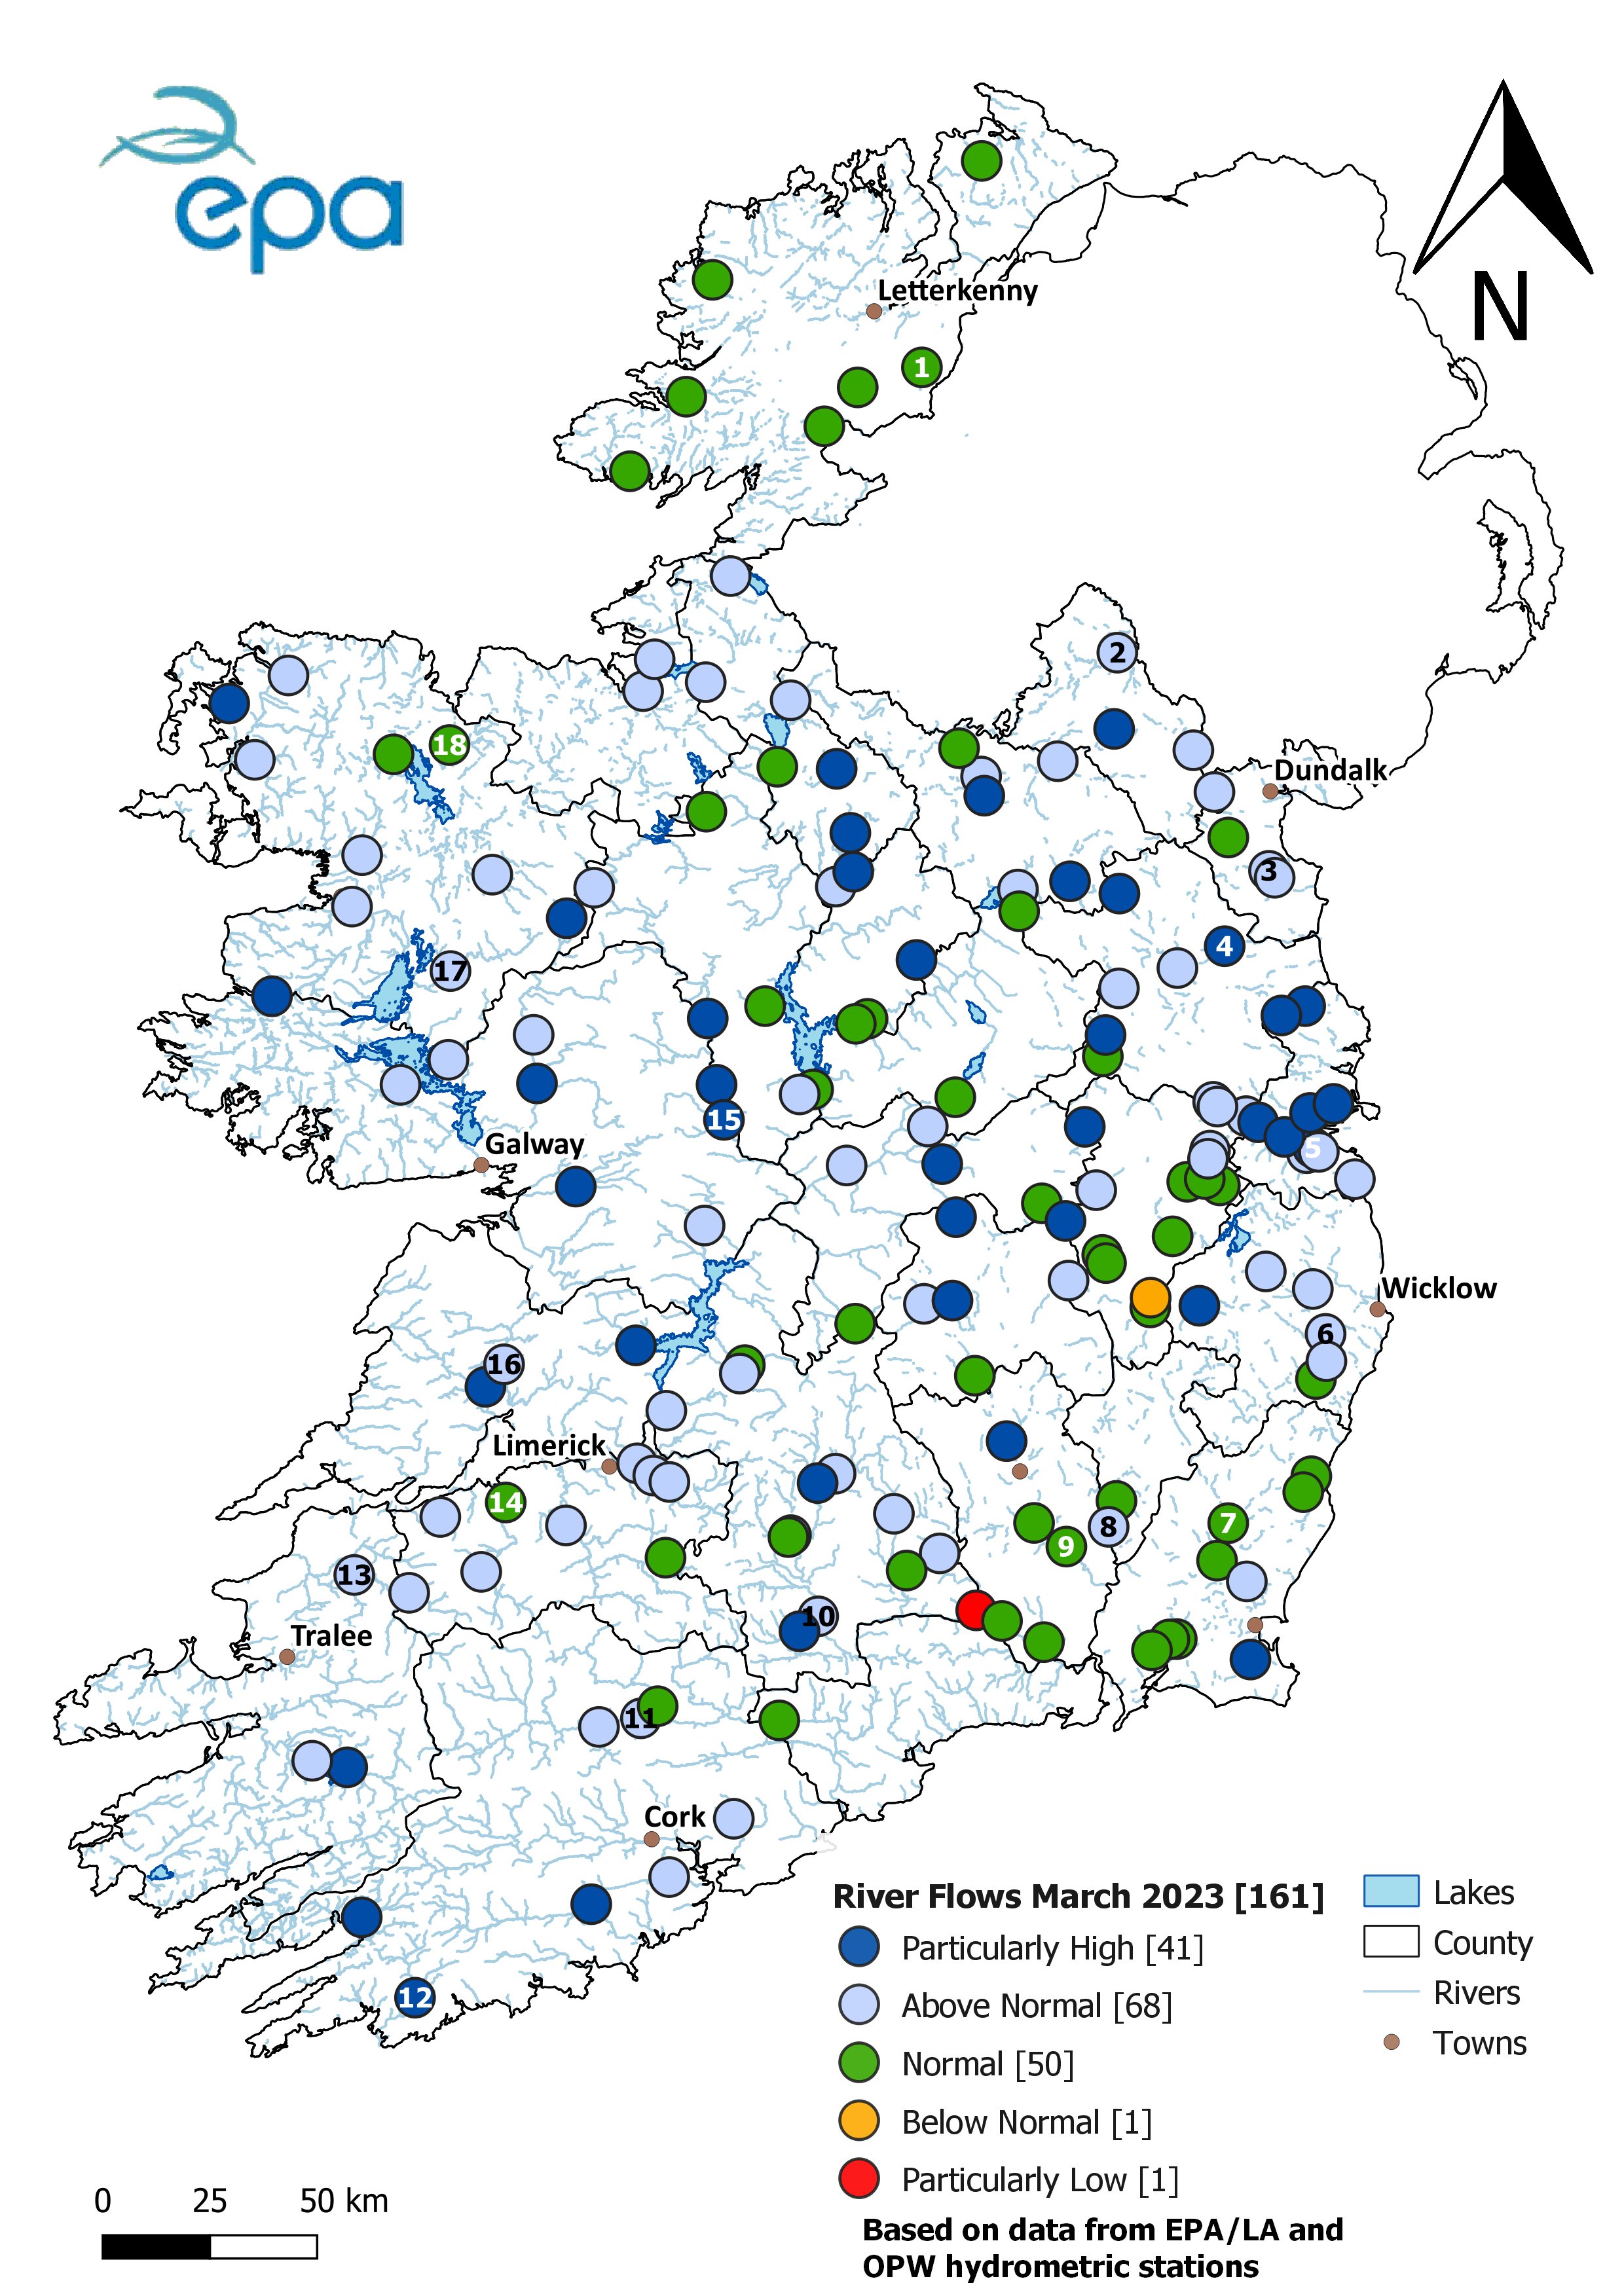 A map of Ireland showing the amount of water flowing in our rivers, with almost all stations Normal (50 locations)), Above Normal (68 locations) or Particularly High (41 locations). One site is below normal and one is particularly low. 